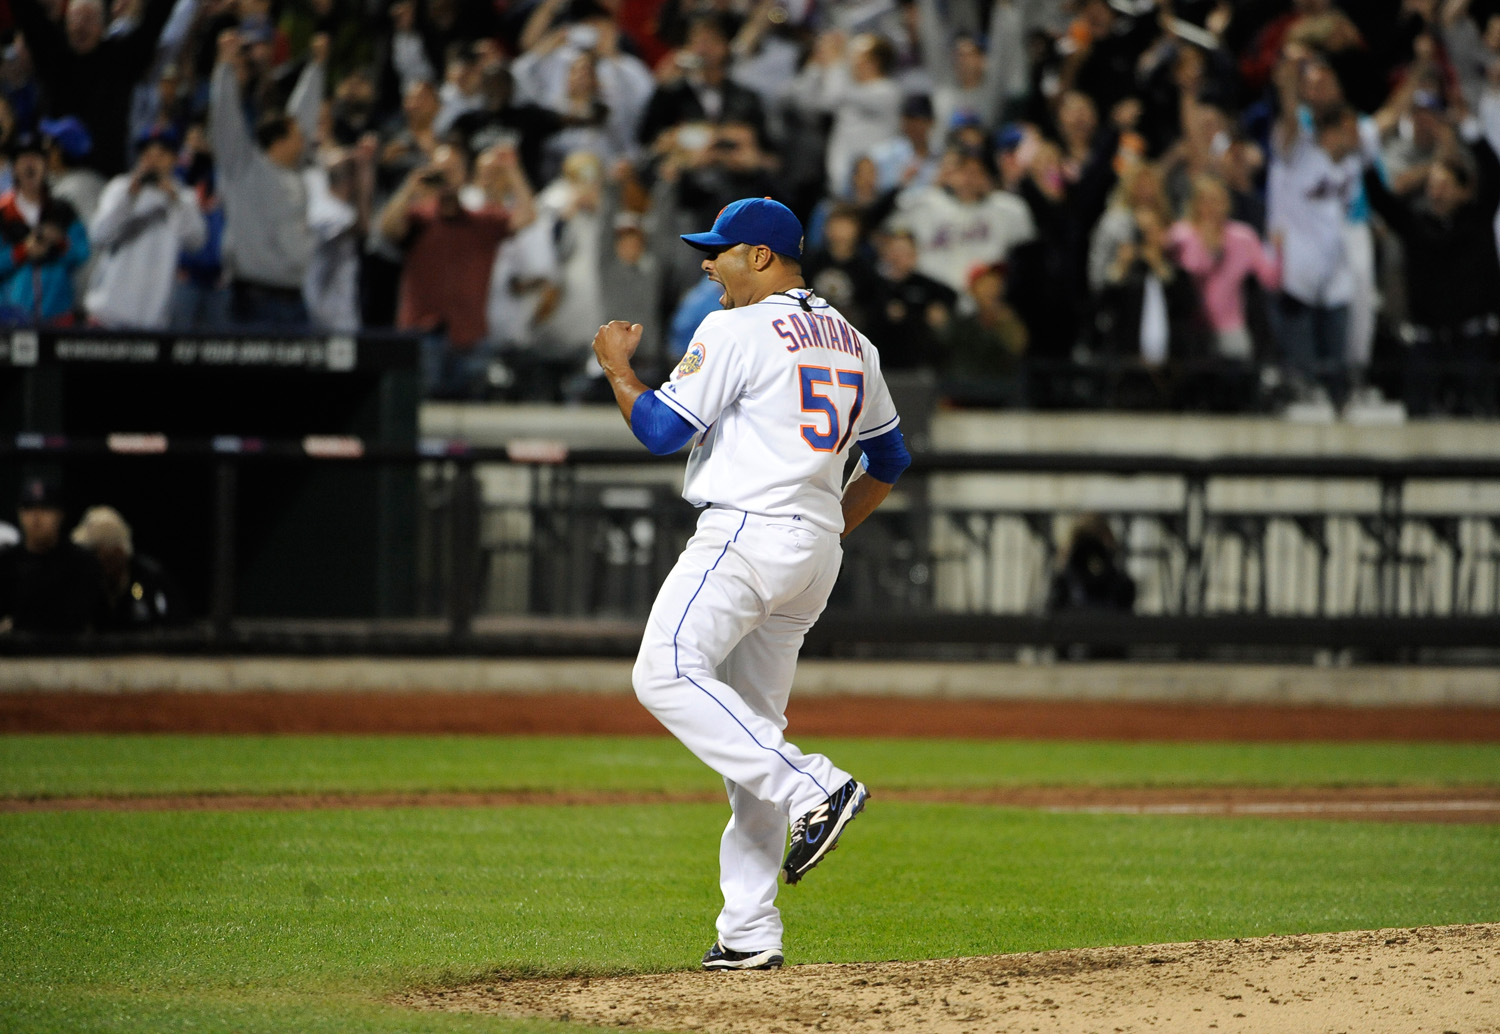 Johan Santana Is Battered as Mets Fall to Dodgers - The New York Times